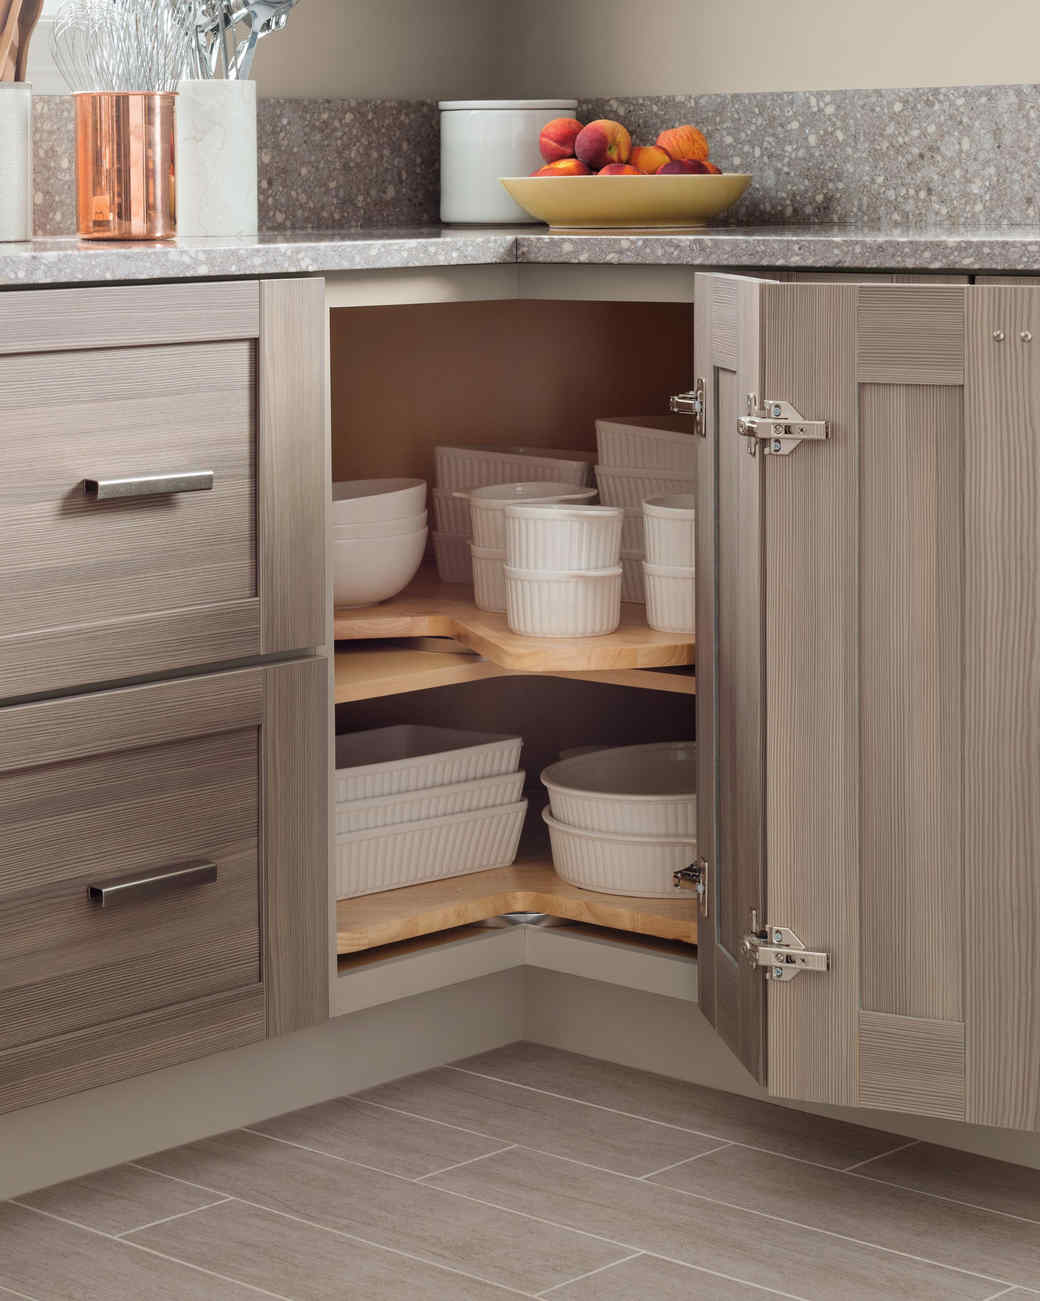 Small Kitchen Storage Ideas for a More Efficient Space